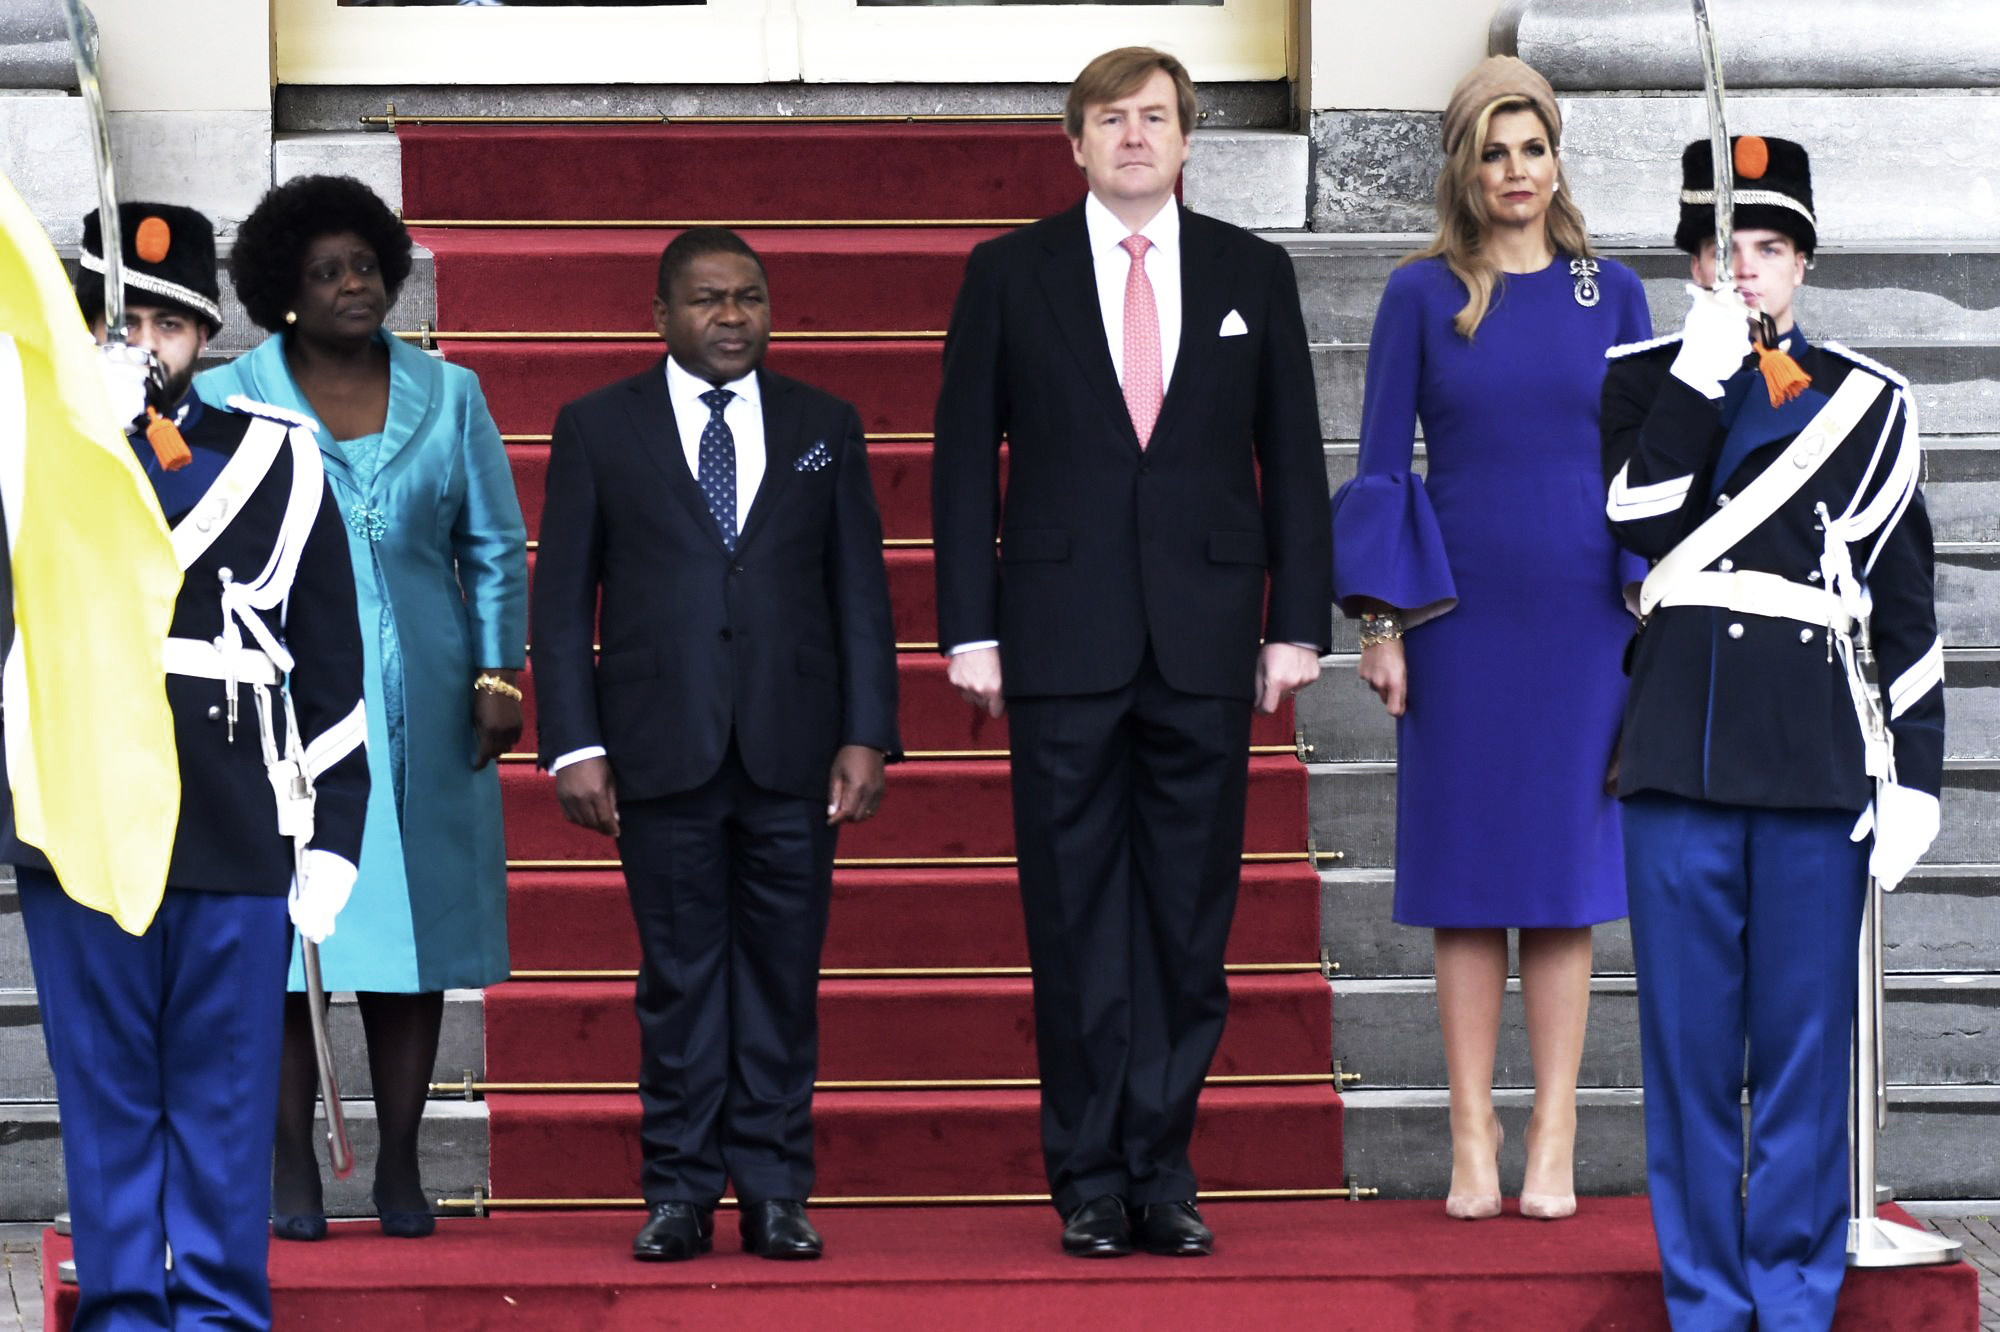 Image: King Willem-Alexander of The Netherlands and Queen Maxima of The Netherlands welcome President Filipe Nyusi of Mozambique and his wife Isaura Nyusi.